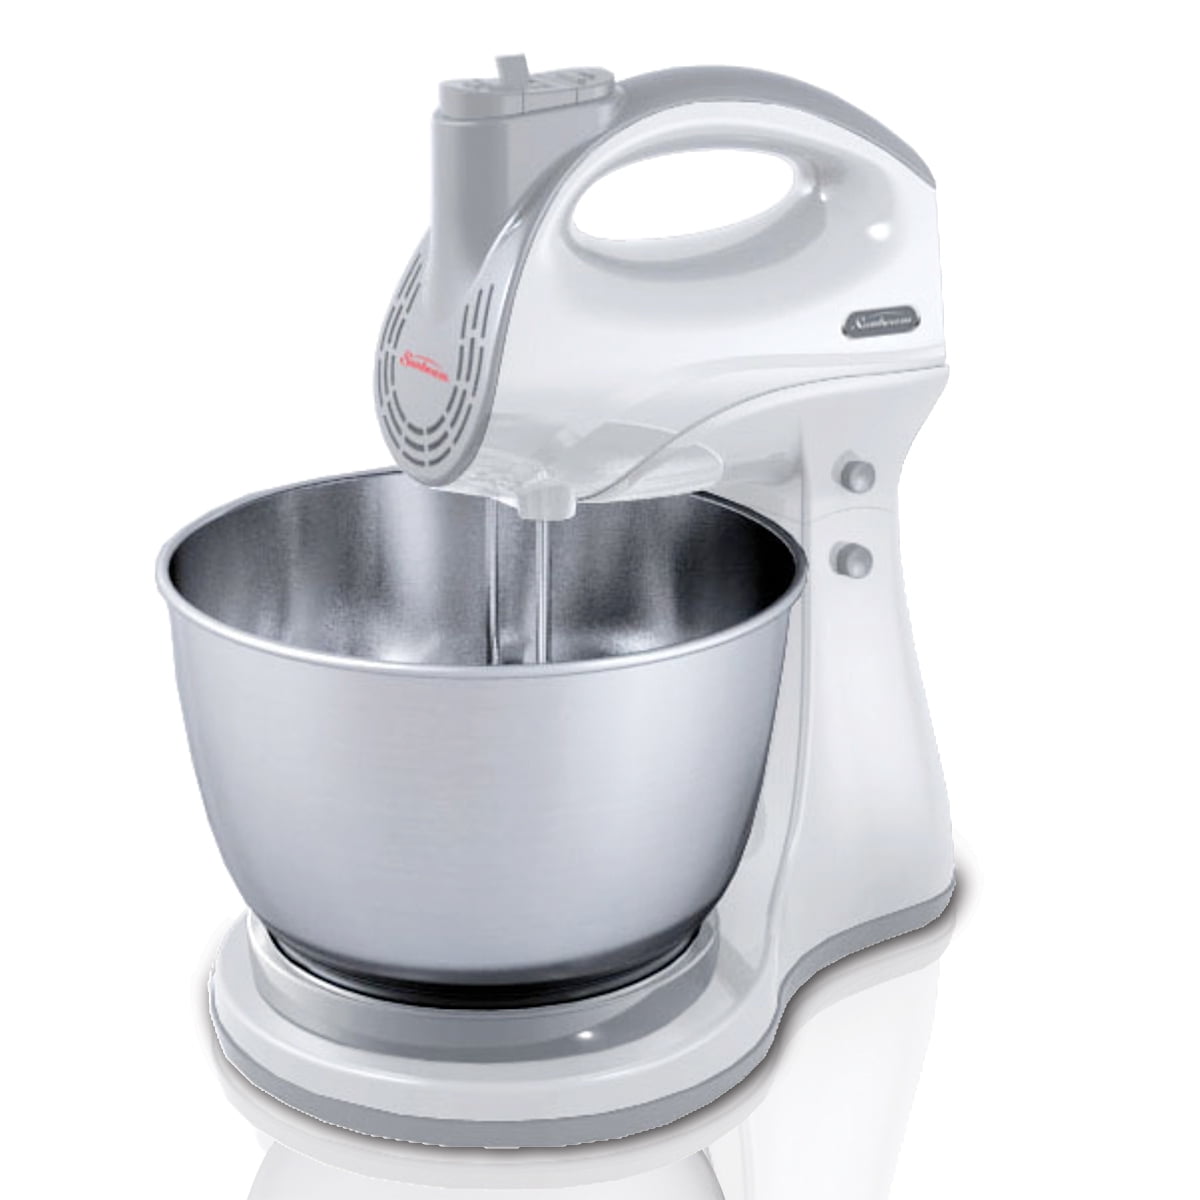 Sunbeam Planetary Mixmaster Bench Mixer With Glass Bowl MXM5000WHMXA5000CL